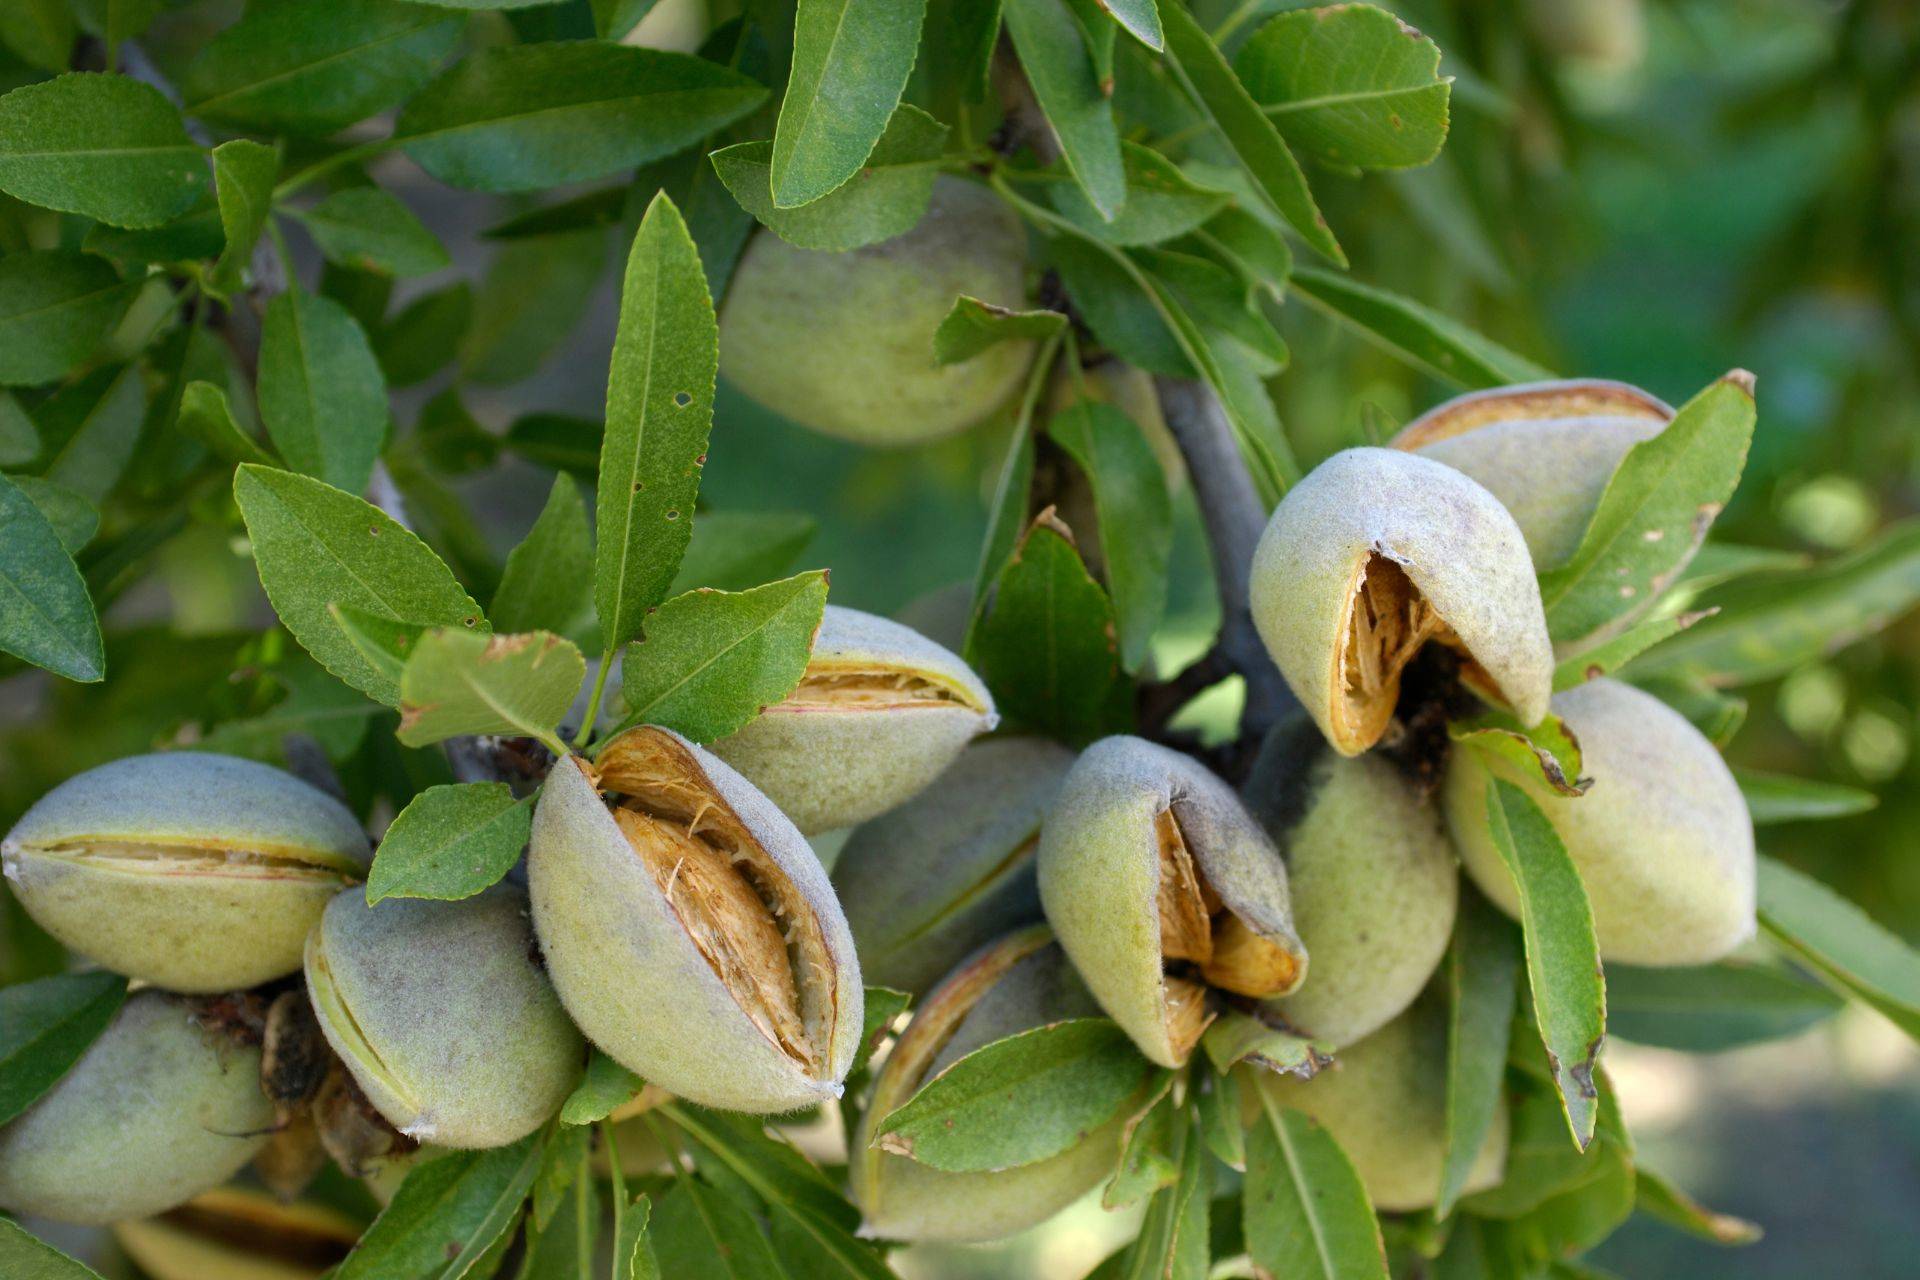 Close-up on almonds in a tree